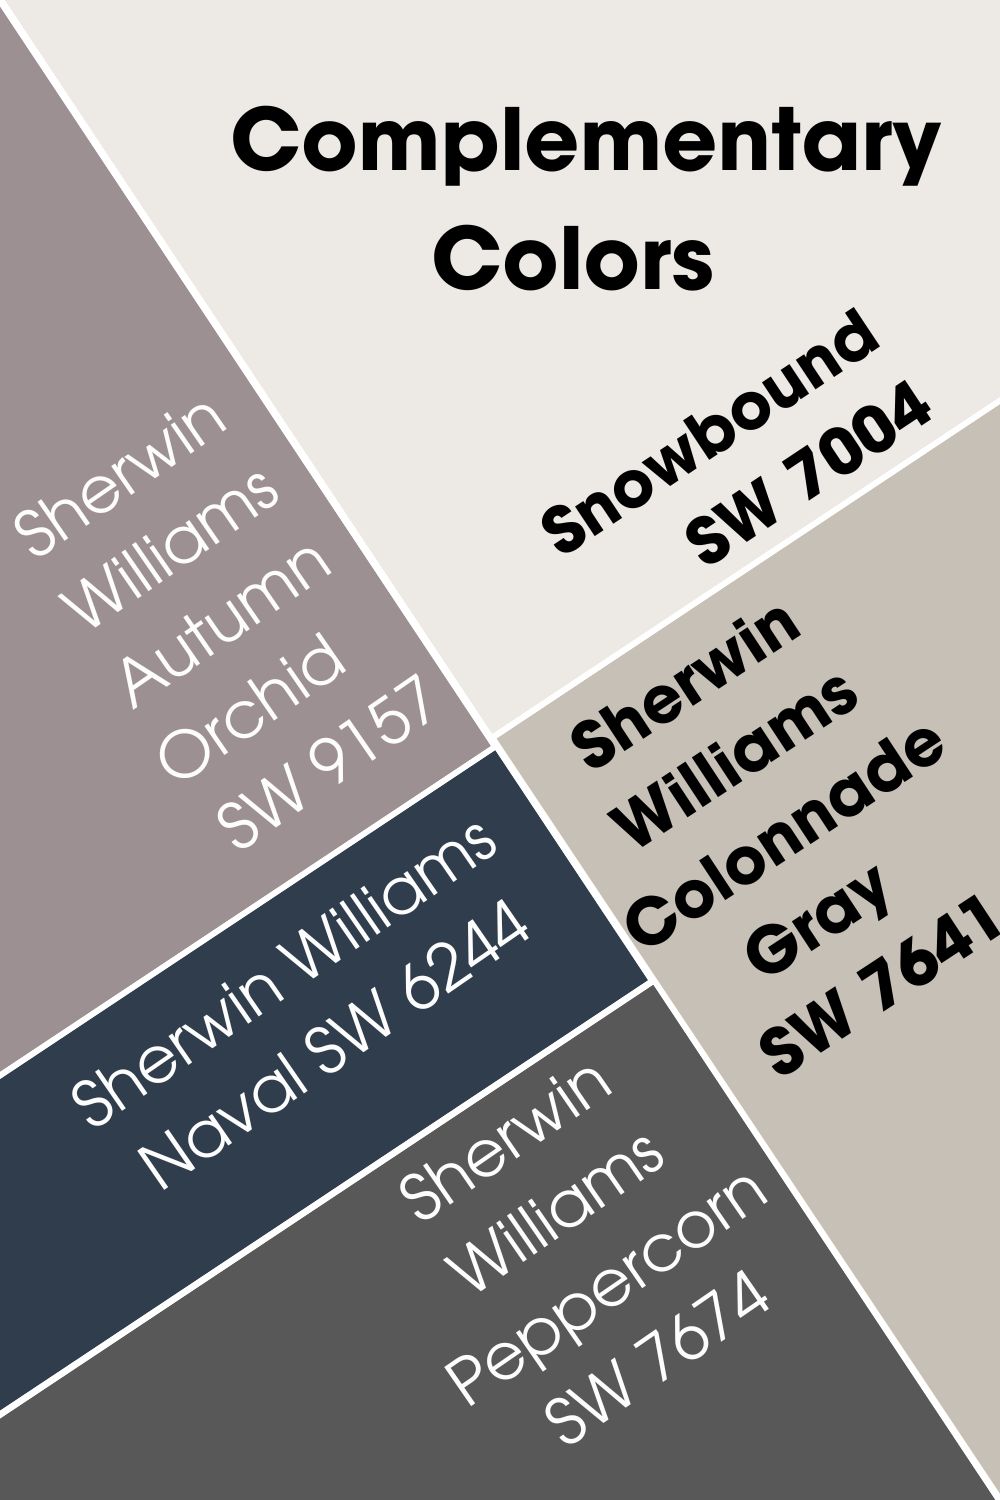 Snowbound (SW 7004) Complementary Colors